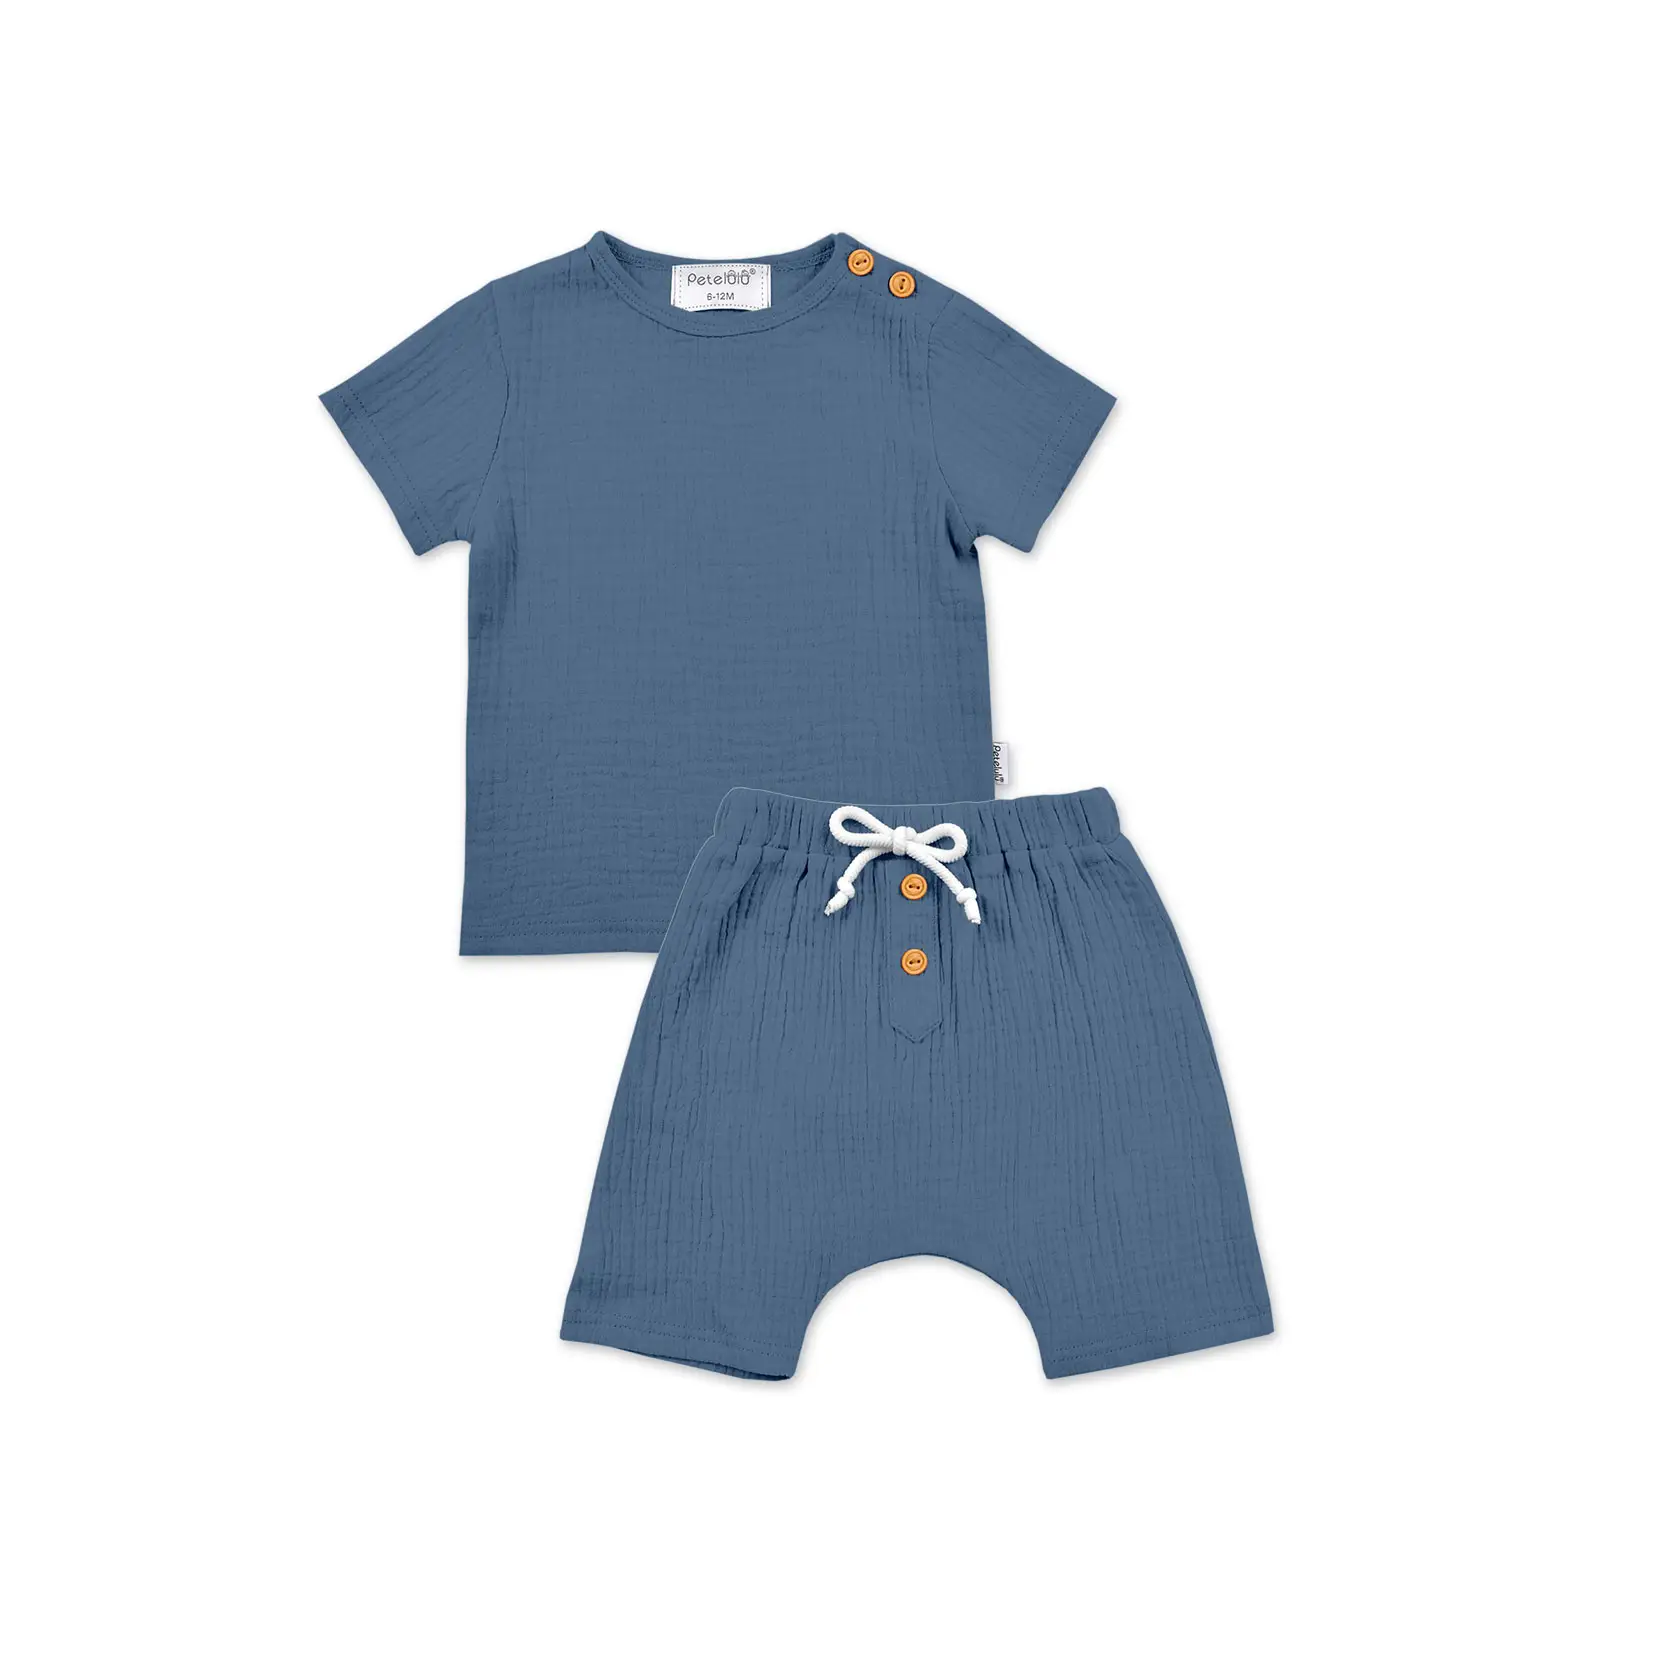 Muslin Fabric Children Clothing Sets Short Sleeve Shorts Baby Boy Clothes 2 Pcs Outfits Summer Clothing Sets